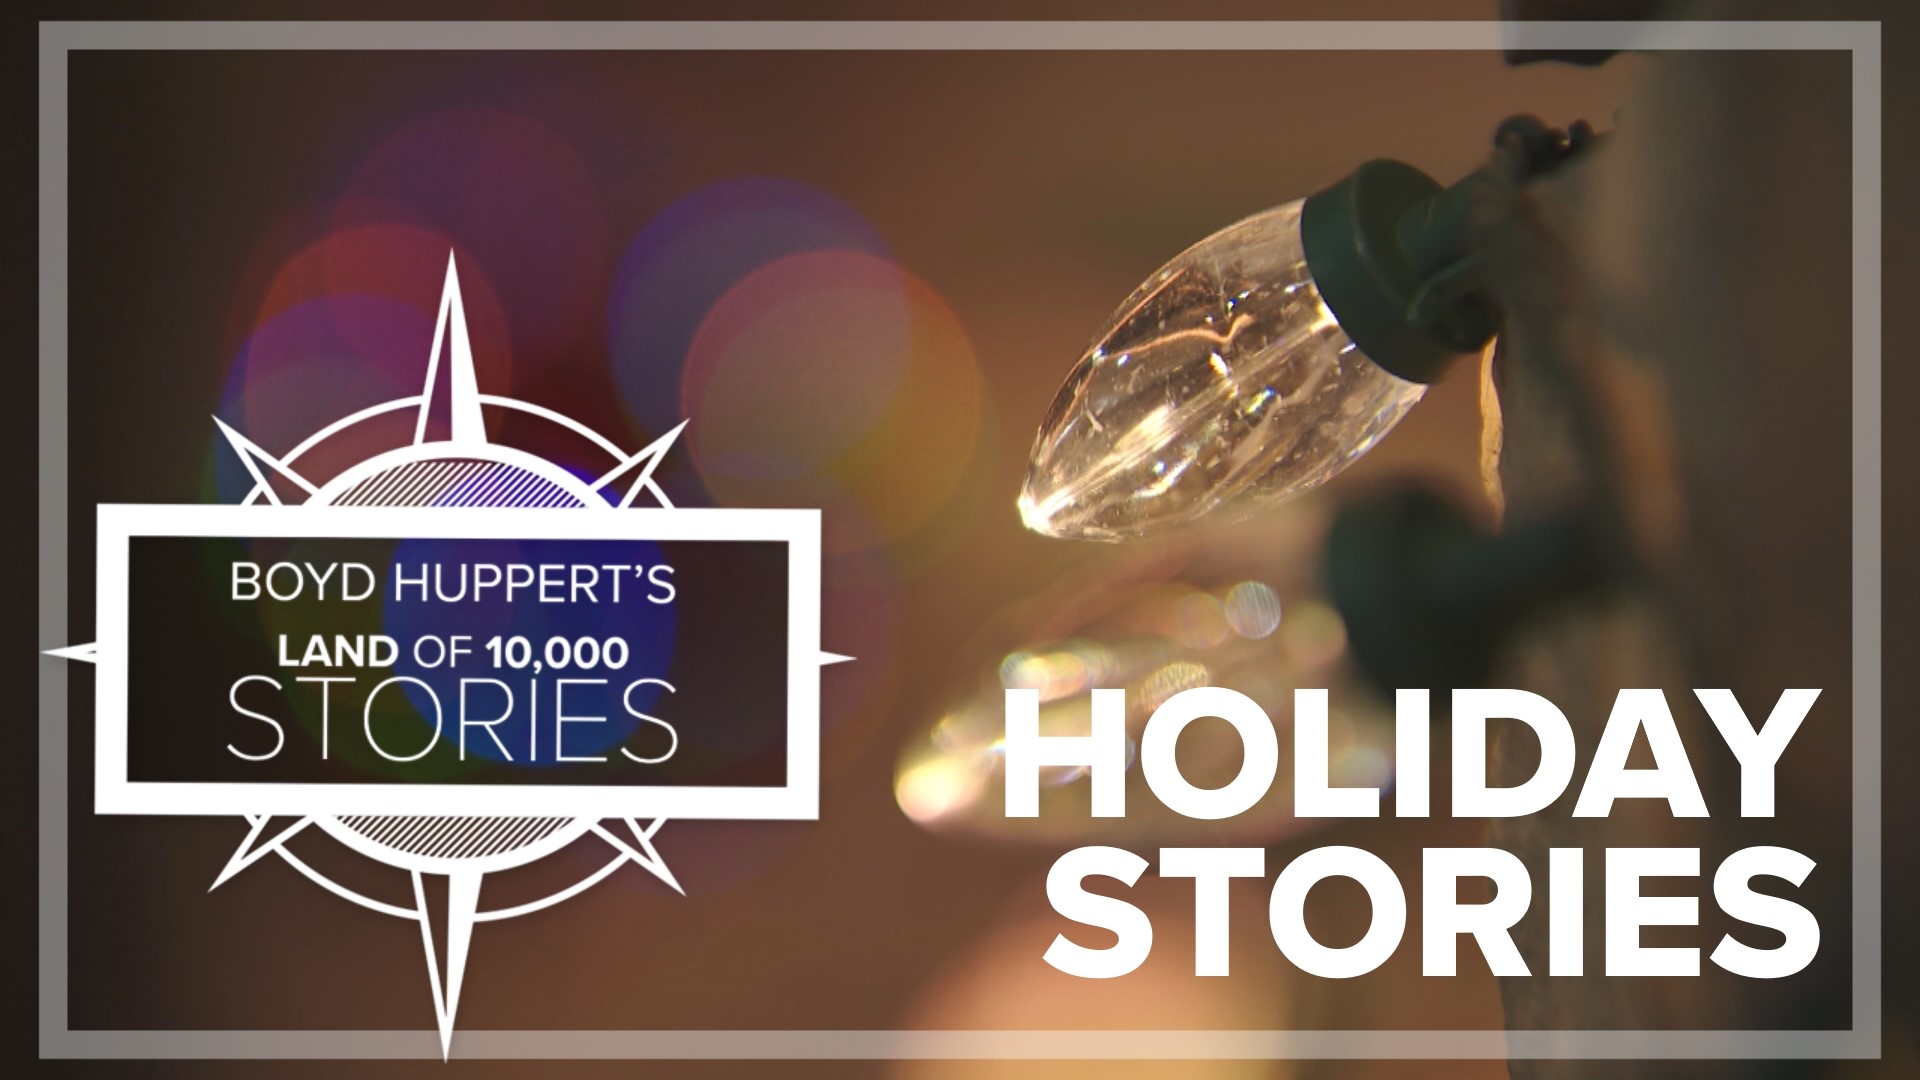 A selection of favorite holiday-themed stories from KARE 11's Boyd Huppert.